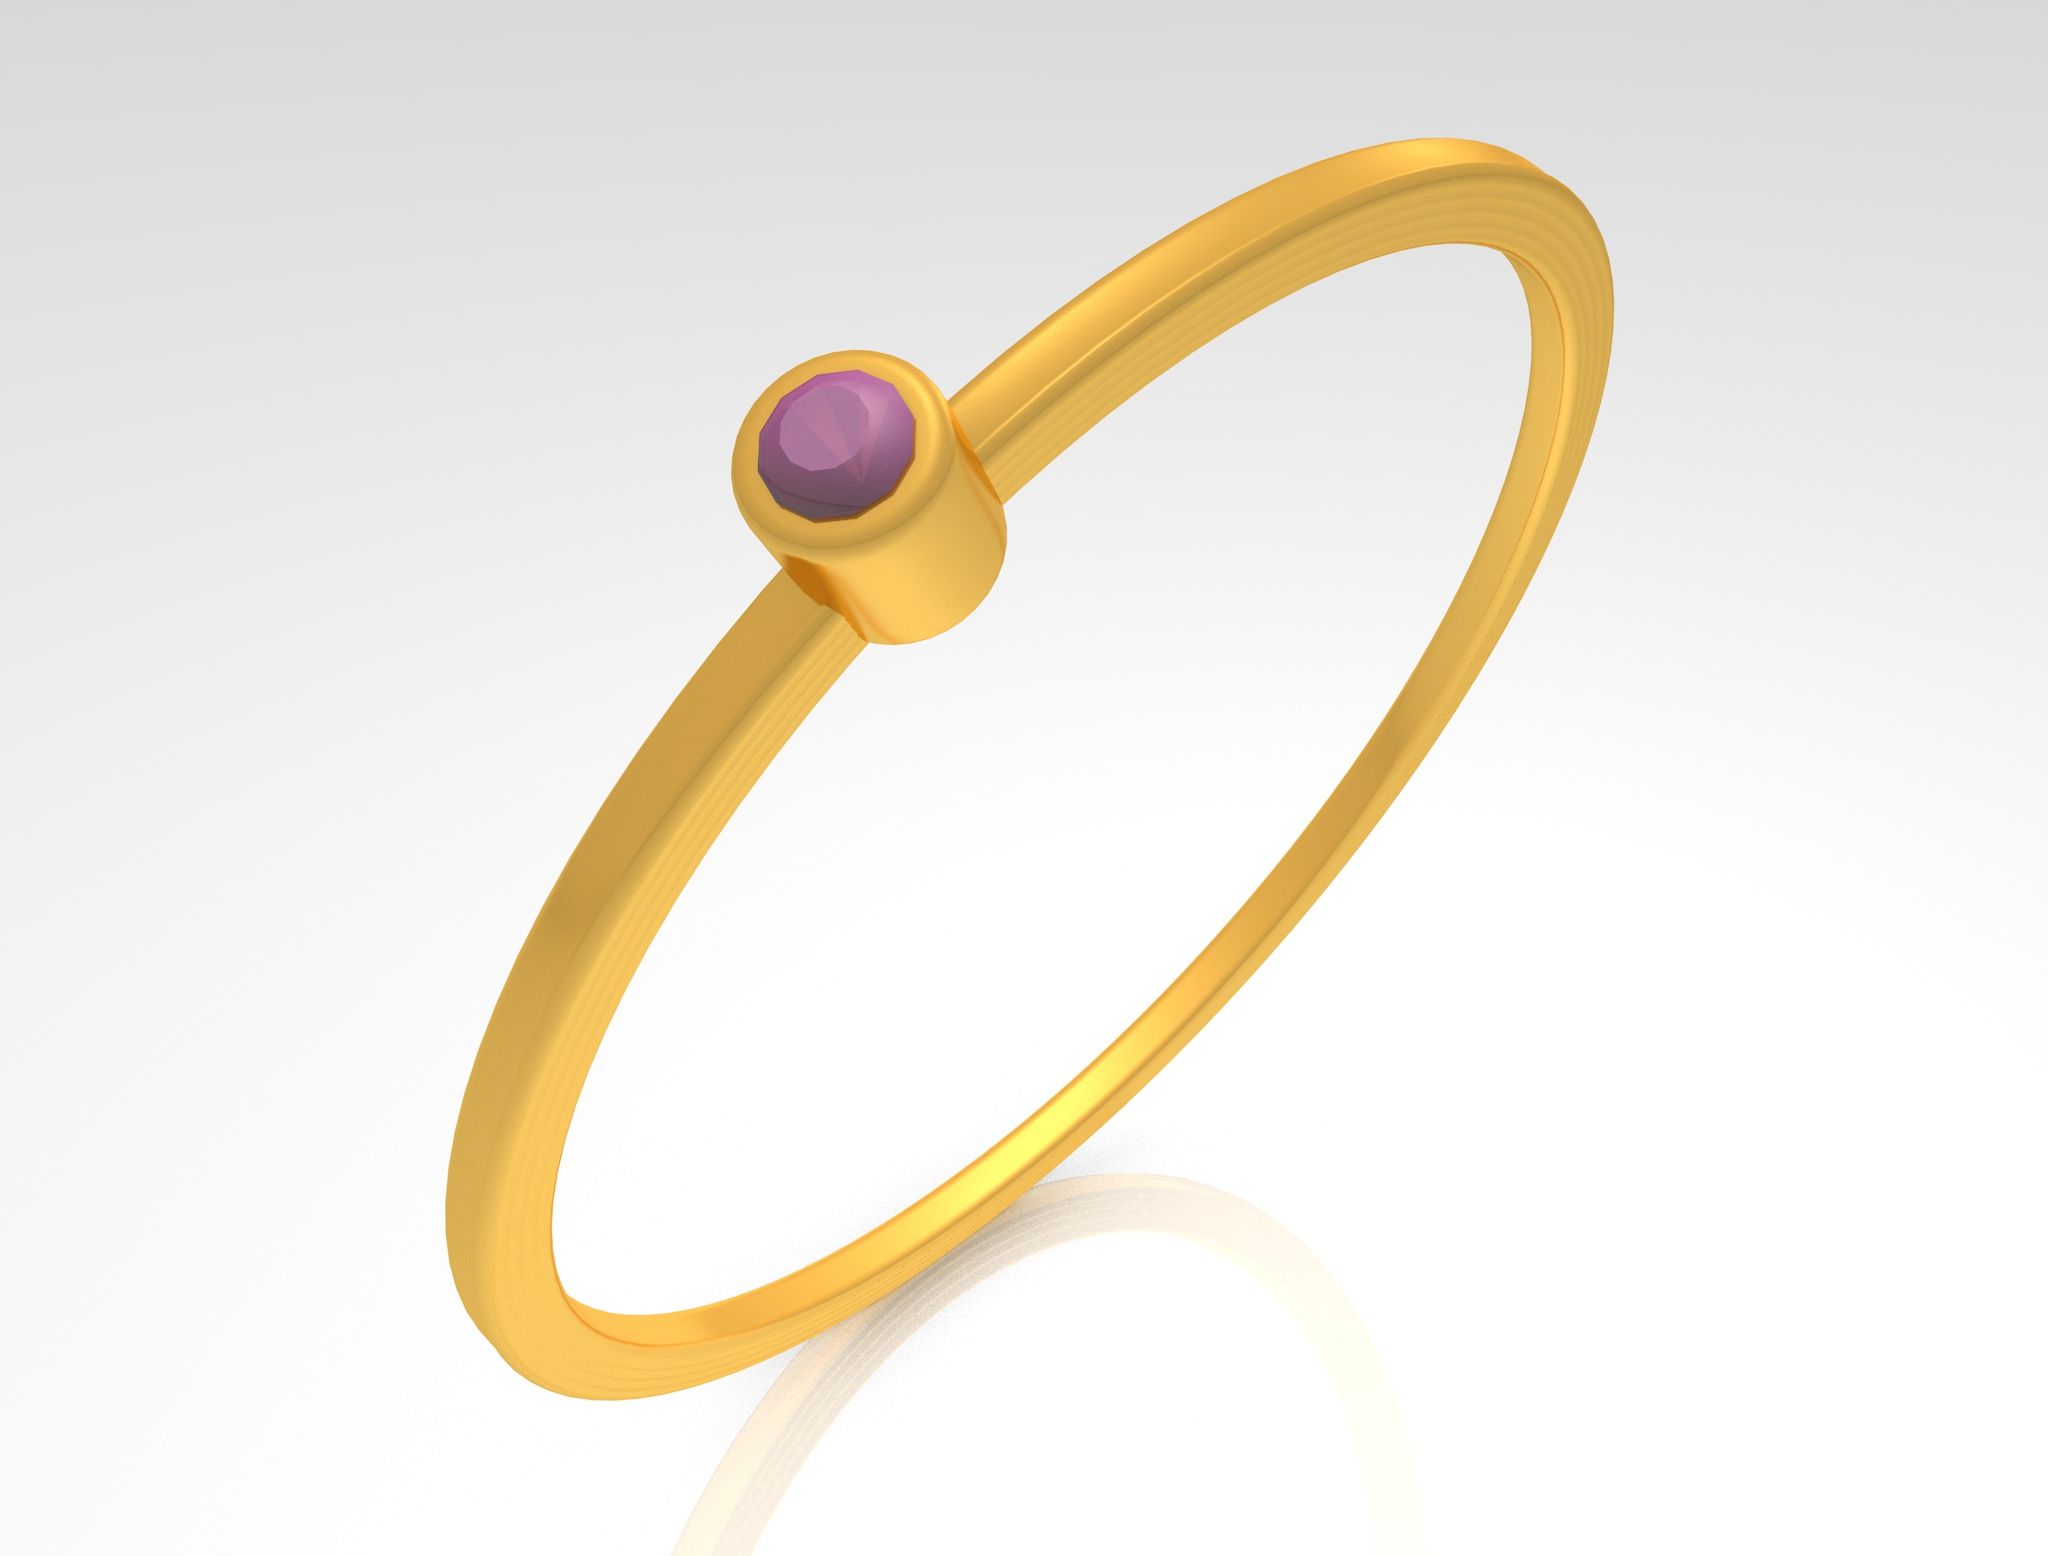 Image-Preview-02-Jewelry Cad 3d Simple Ring Model Stl - KtkarajRing02.jpg STL-Datei Jewelry Cad 3d Simple Ring Model Stl - KtkarajRing02 herunterladen • 3D-druckbare Vorlage, KTkaRAJ